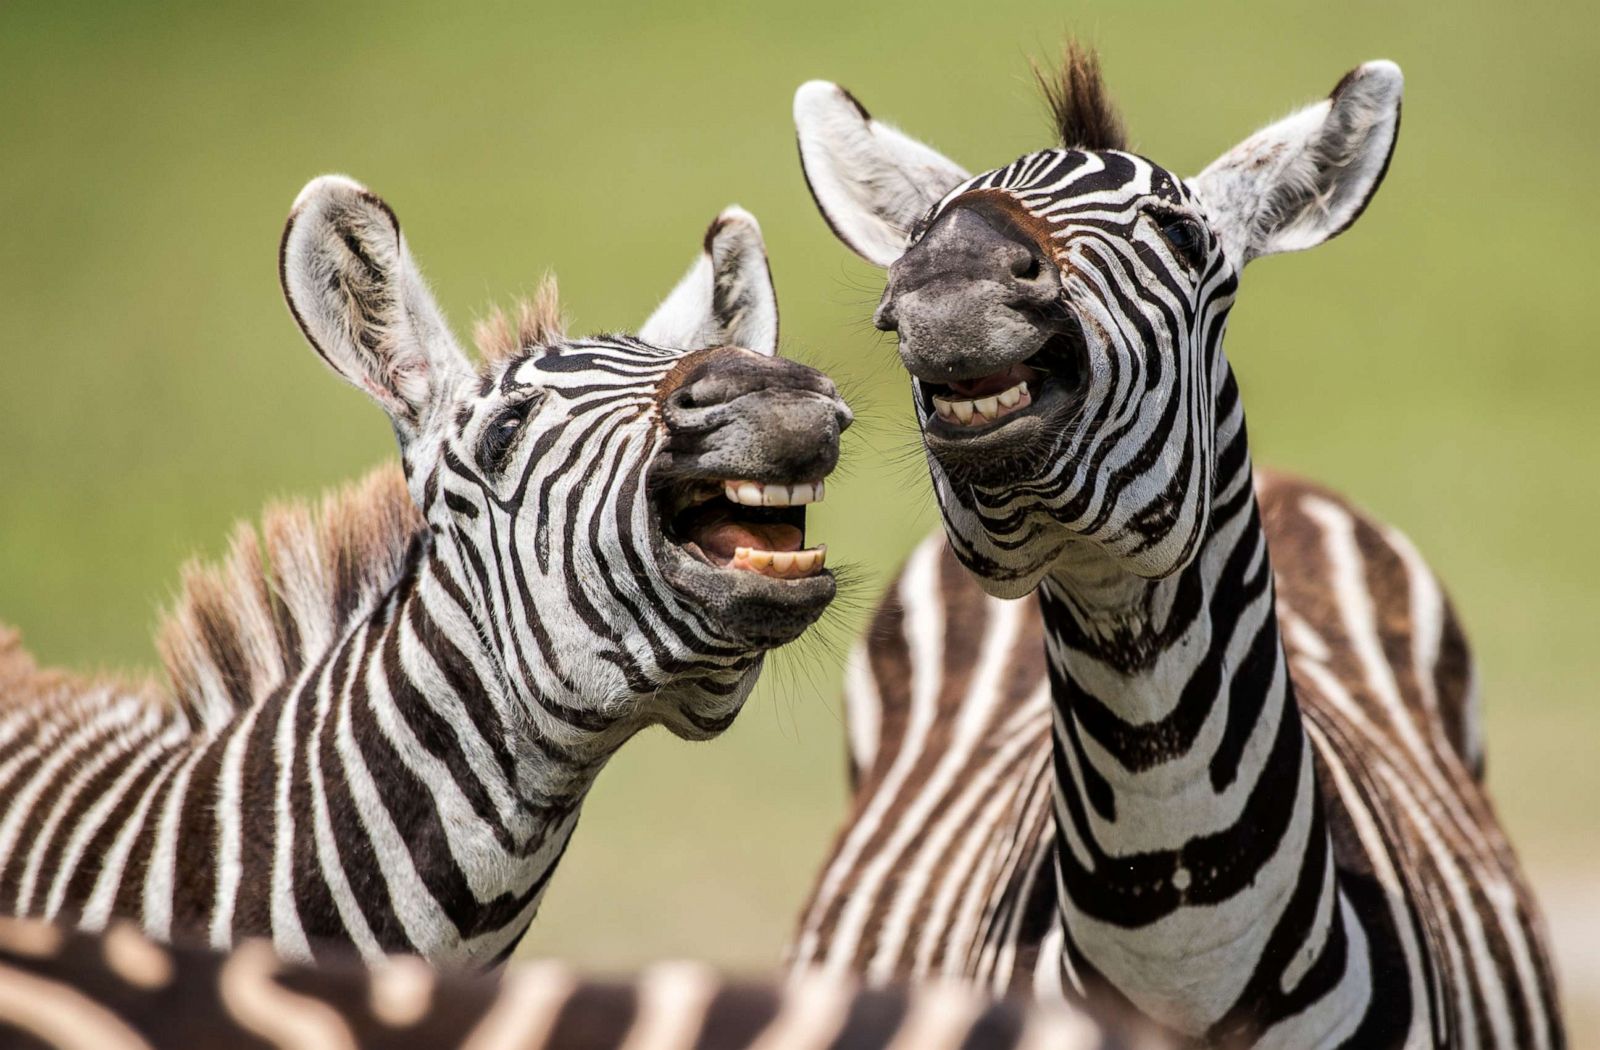 Laughing Zebra from 2019 Comedy Wildlife Competition Finalists.